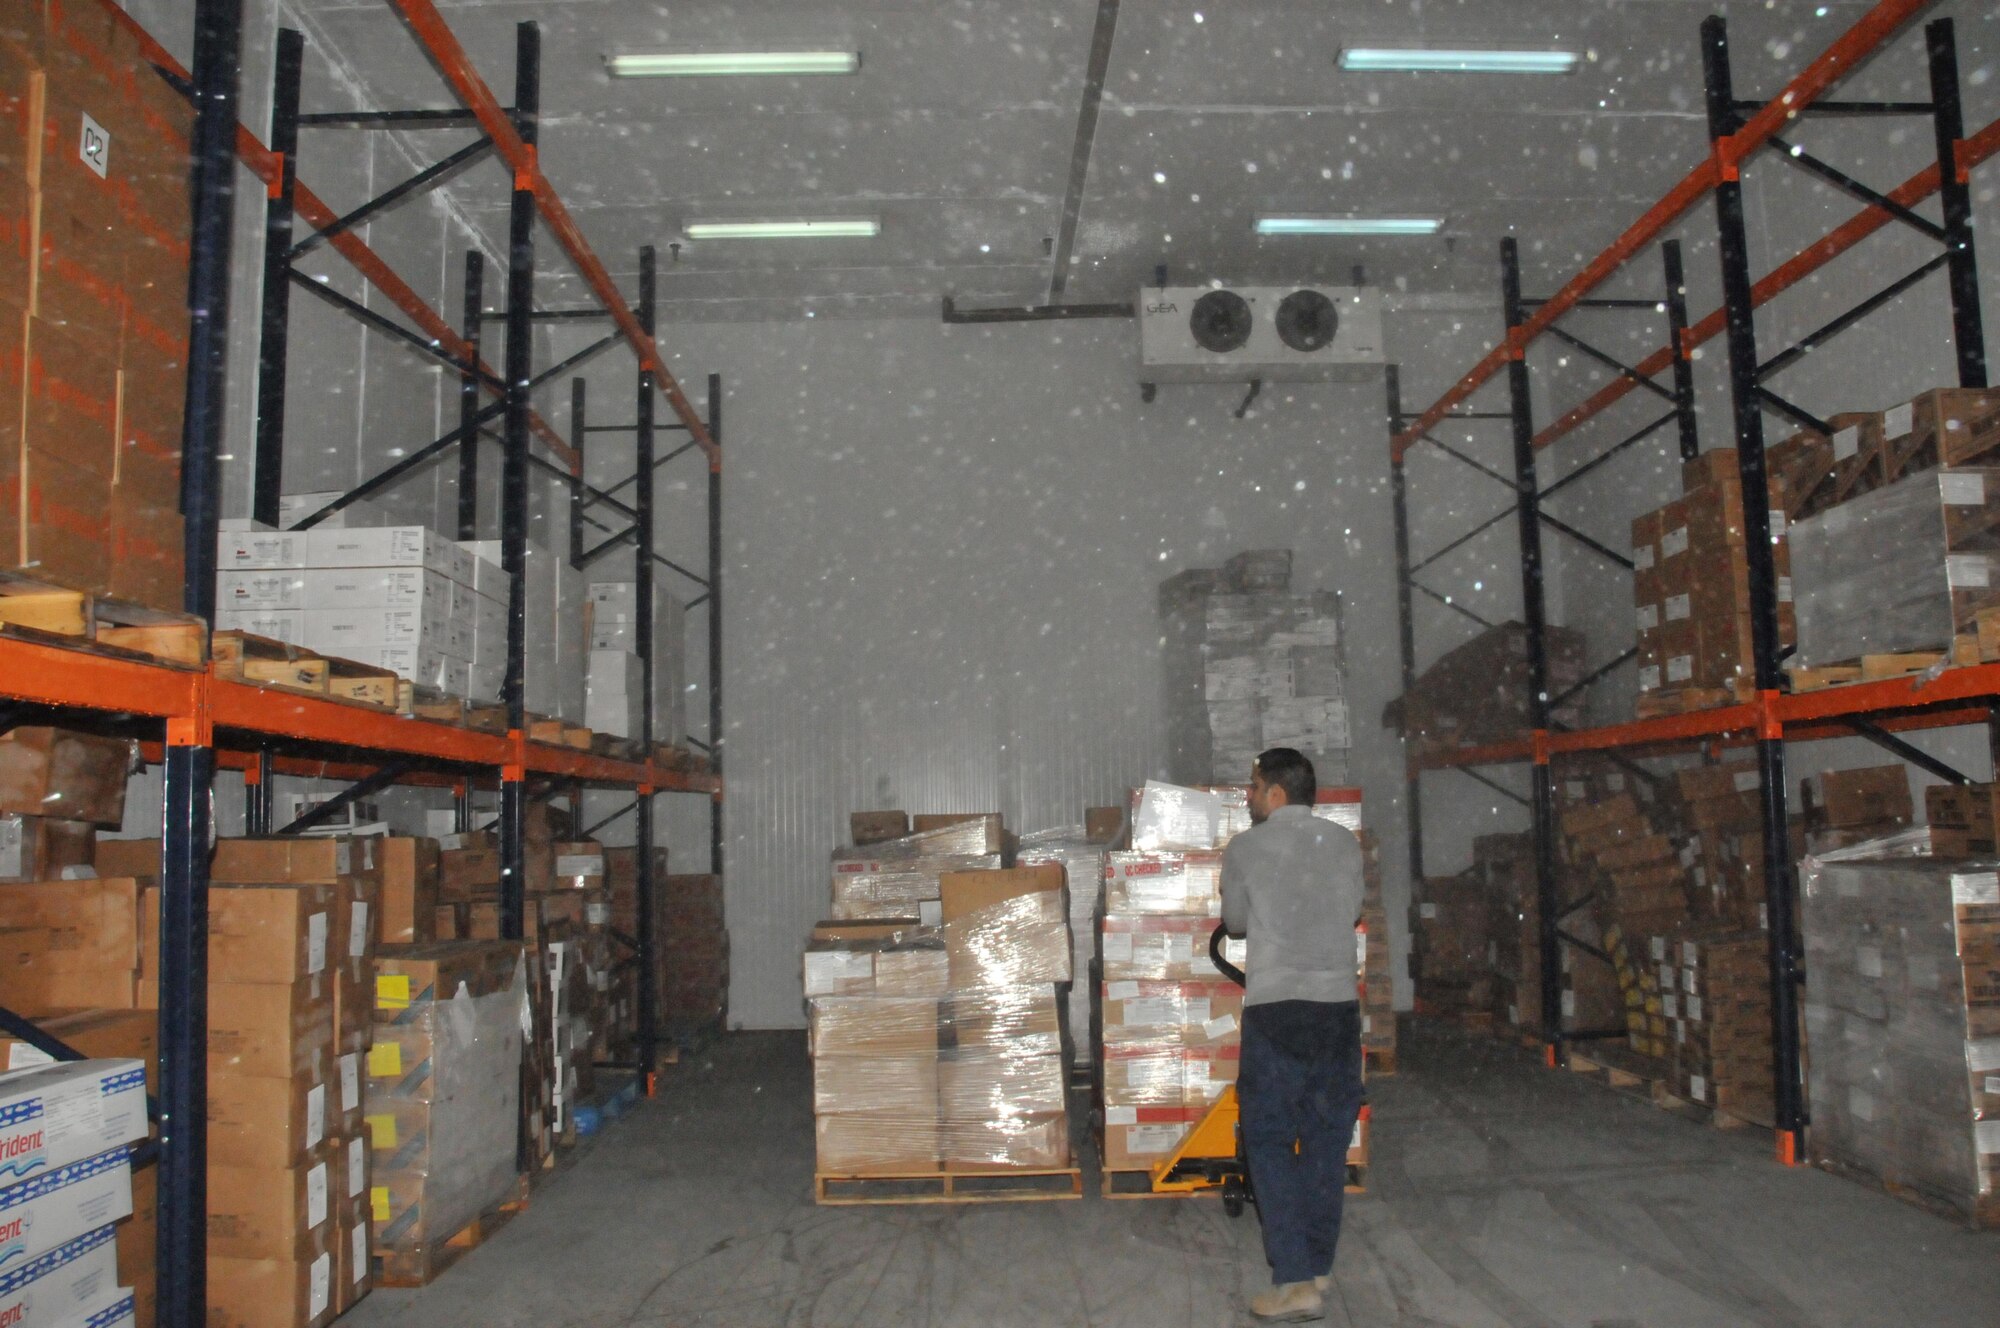 The 379th Expeditionary Force Support Squadron ration warehouse, stores food ordered for the dining facilities and the flight kitchens at Al Udeid Air Base, Qatar. The rations warehouse has two freezers and two chillers to ensure food stays fresh. (U.S. Air Force photo by Tech. Sgt. Terrica Y. Jones/Released)